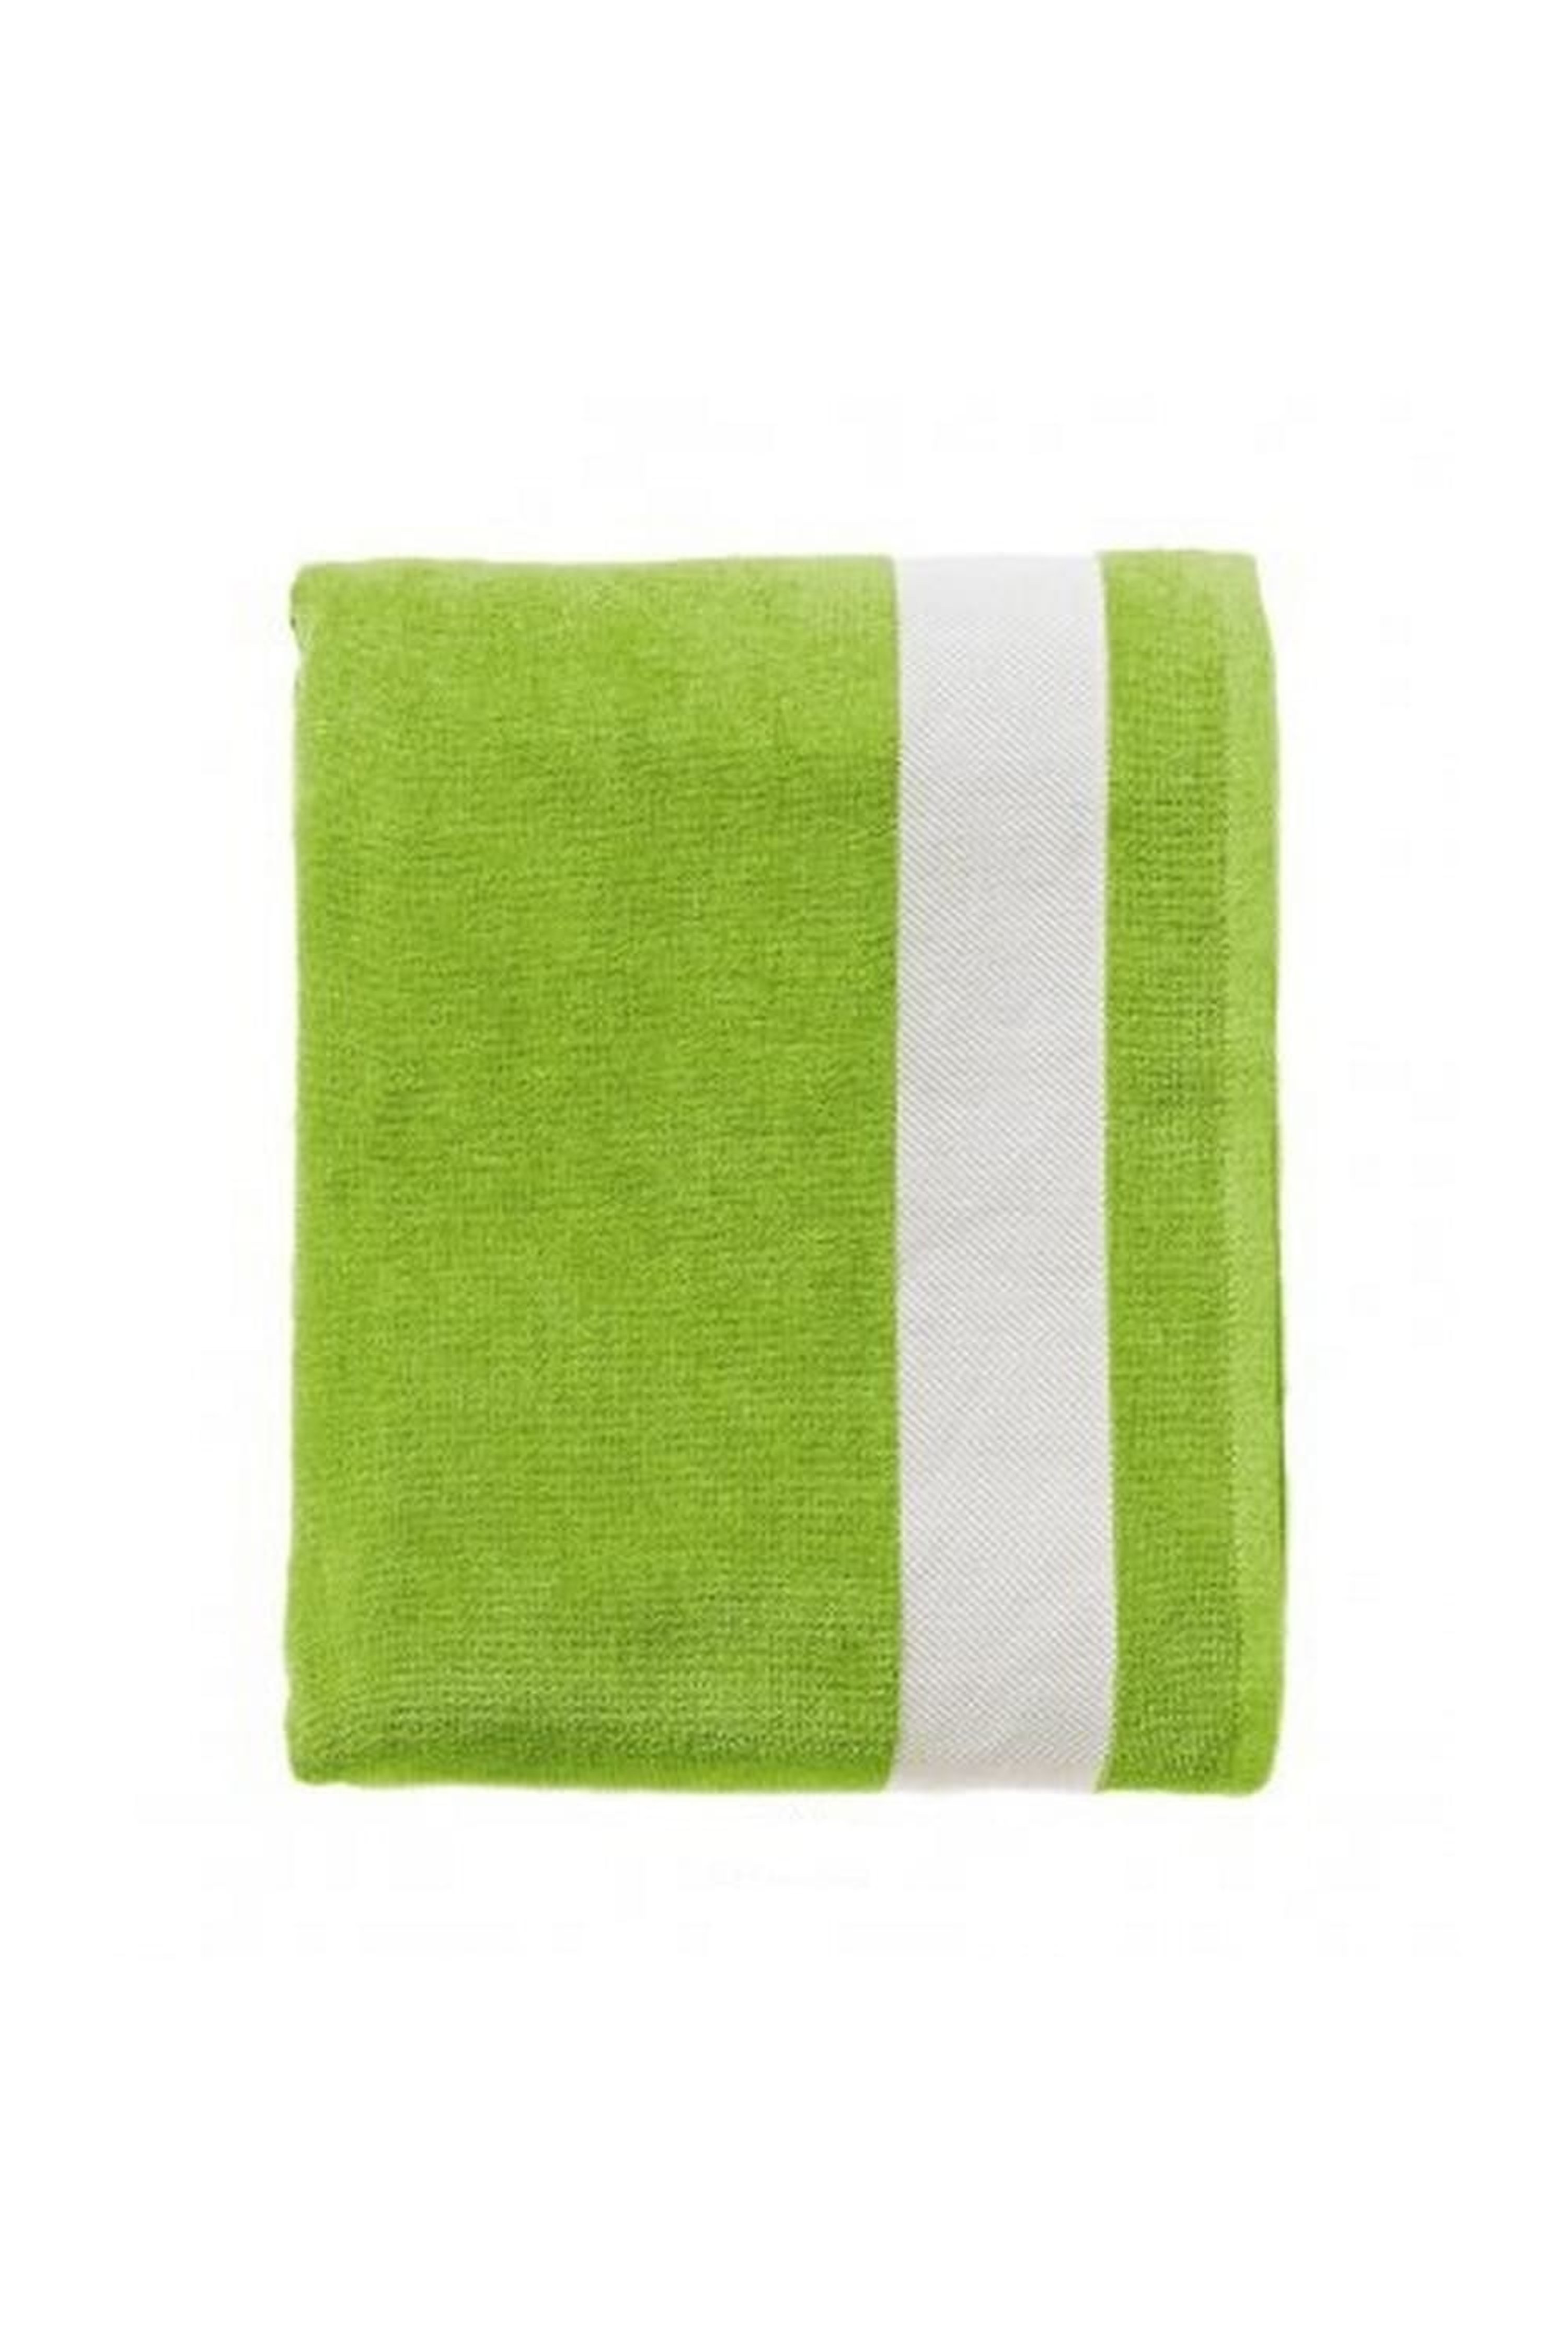 SOLS SOLS SOLS LAGOON COTTON BEACH TOWEL (LIME GREEN/WHITE) (ONE SIZE)